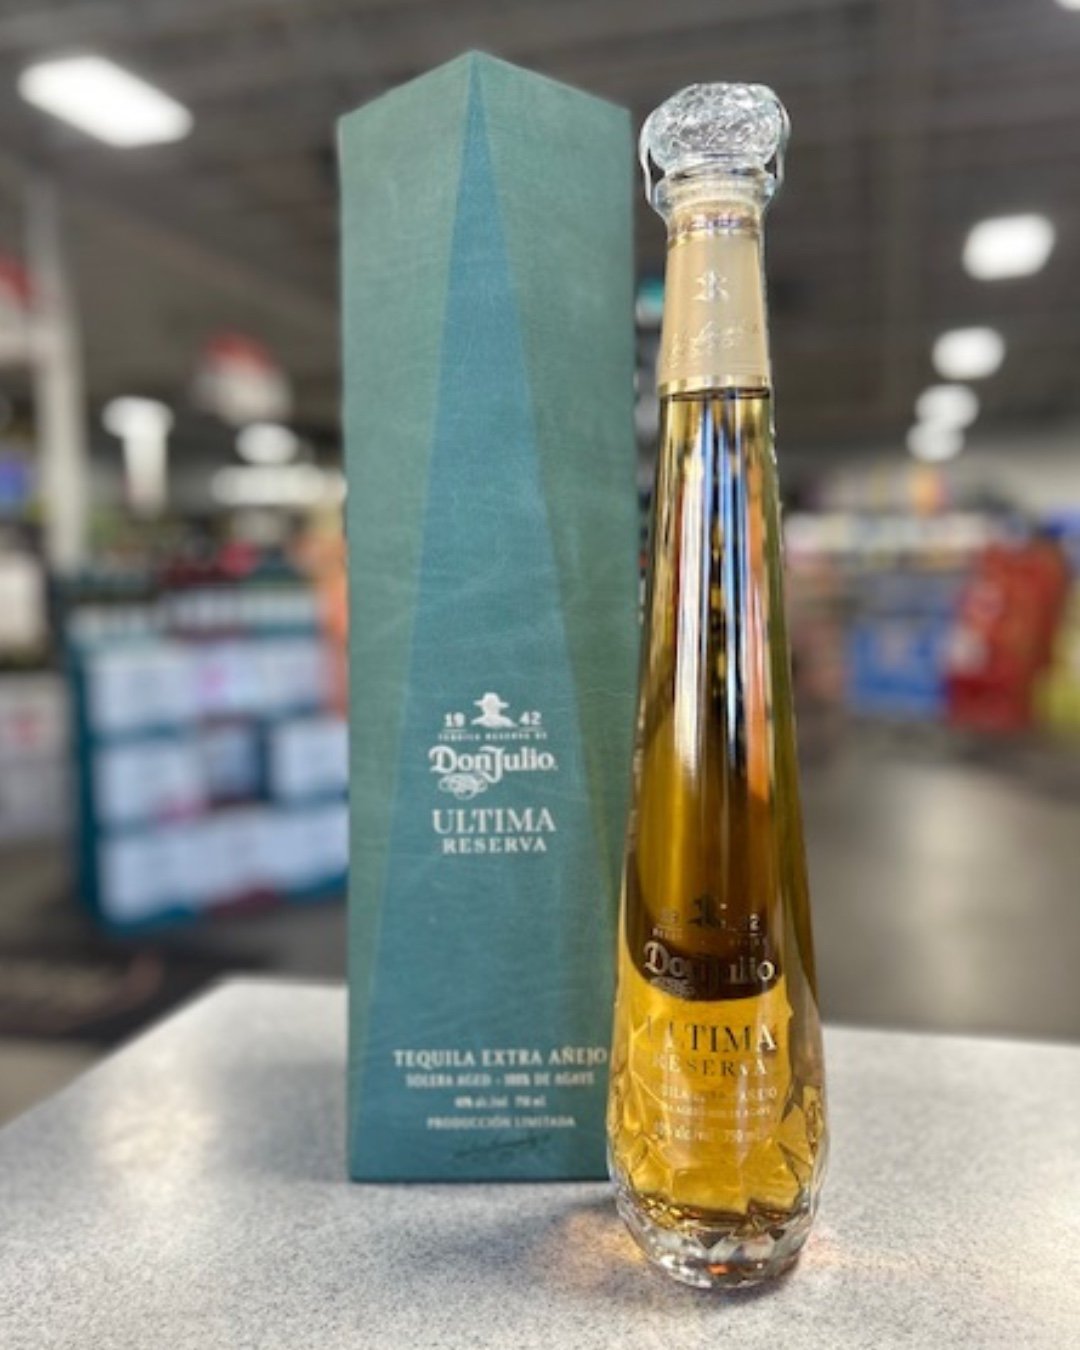 Pop open a bottle of paradise and let your #tequilacation begin 🥃

@donjuliotequila Ultima Reserva Extra A&ntilde;ejo is available now at #chicagolakeliquors.